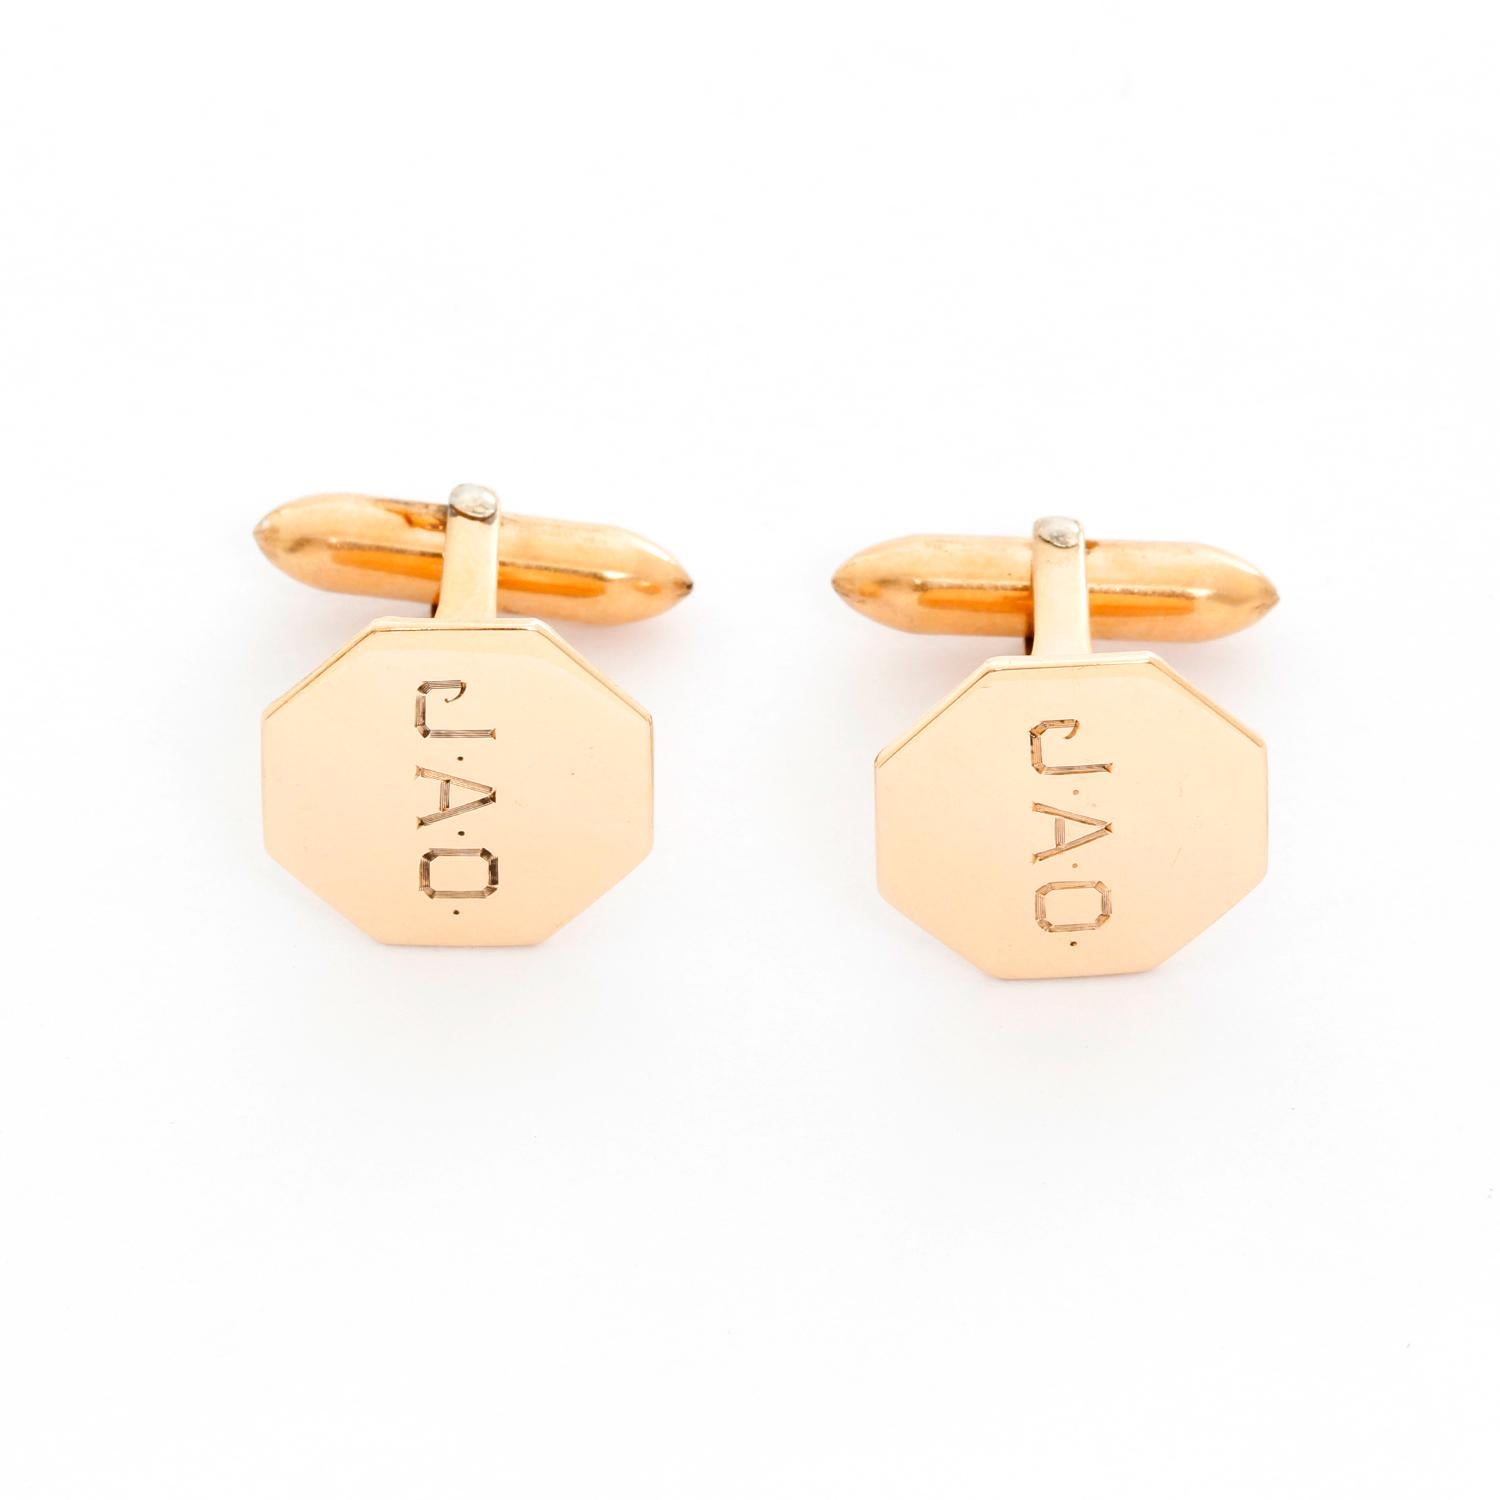 These amazing cufflinks feature a geometric design with engraved initials set in 10k rose gold. Cufflinks measure apx. 9/16-inch in diameter.  Total weight is 5.1 grams.